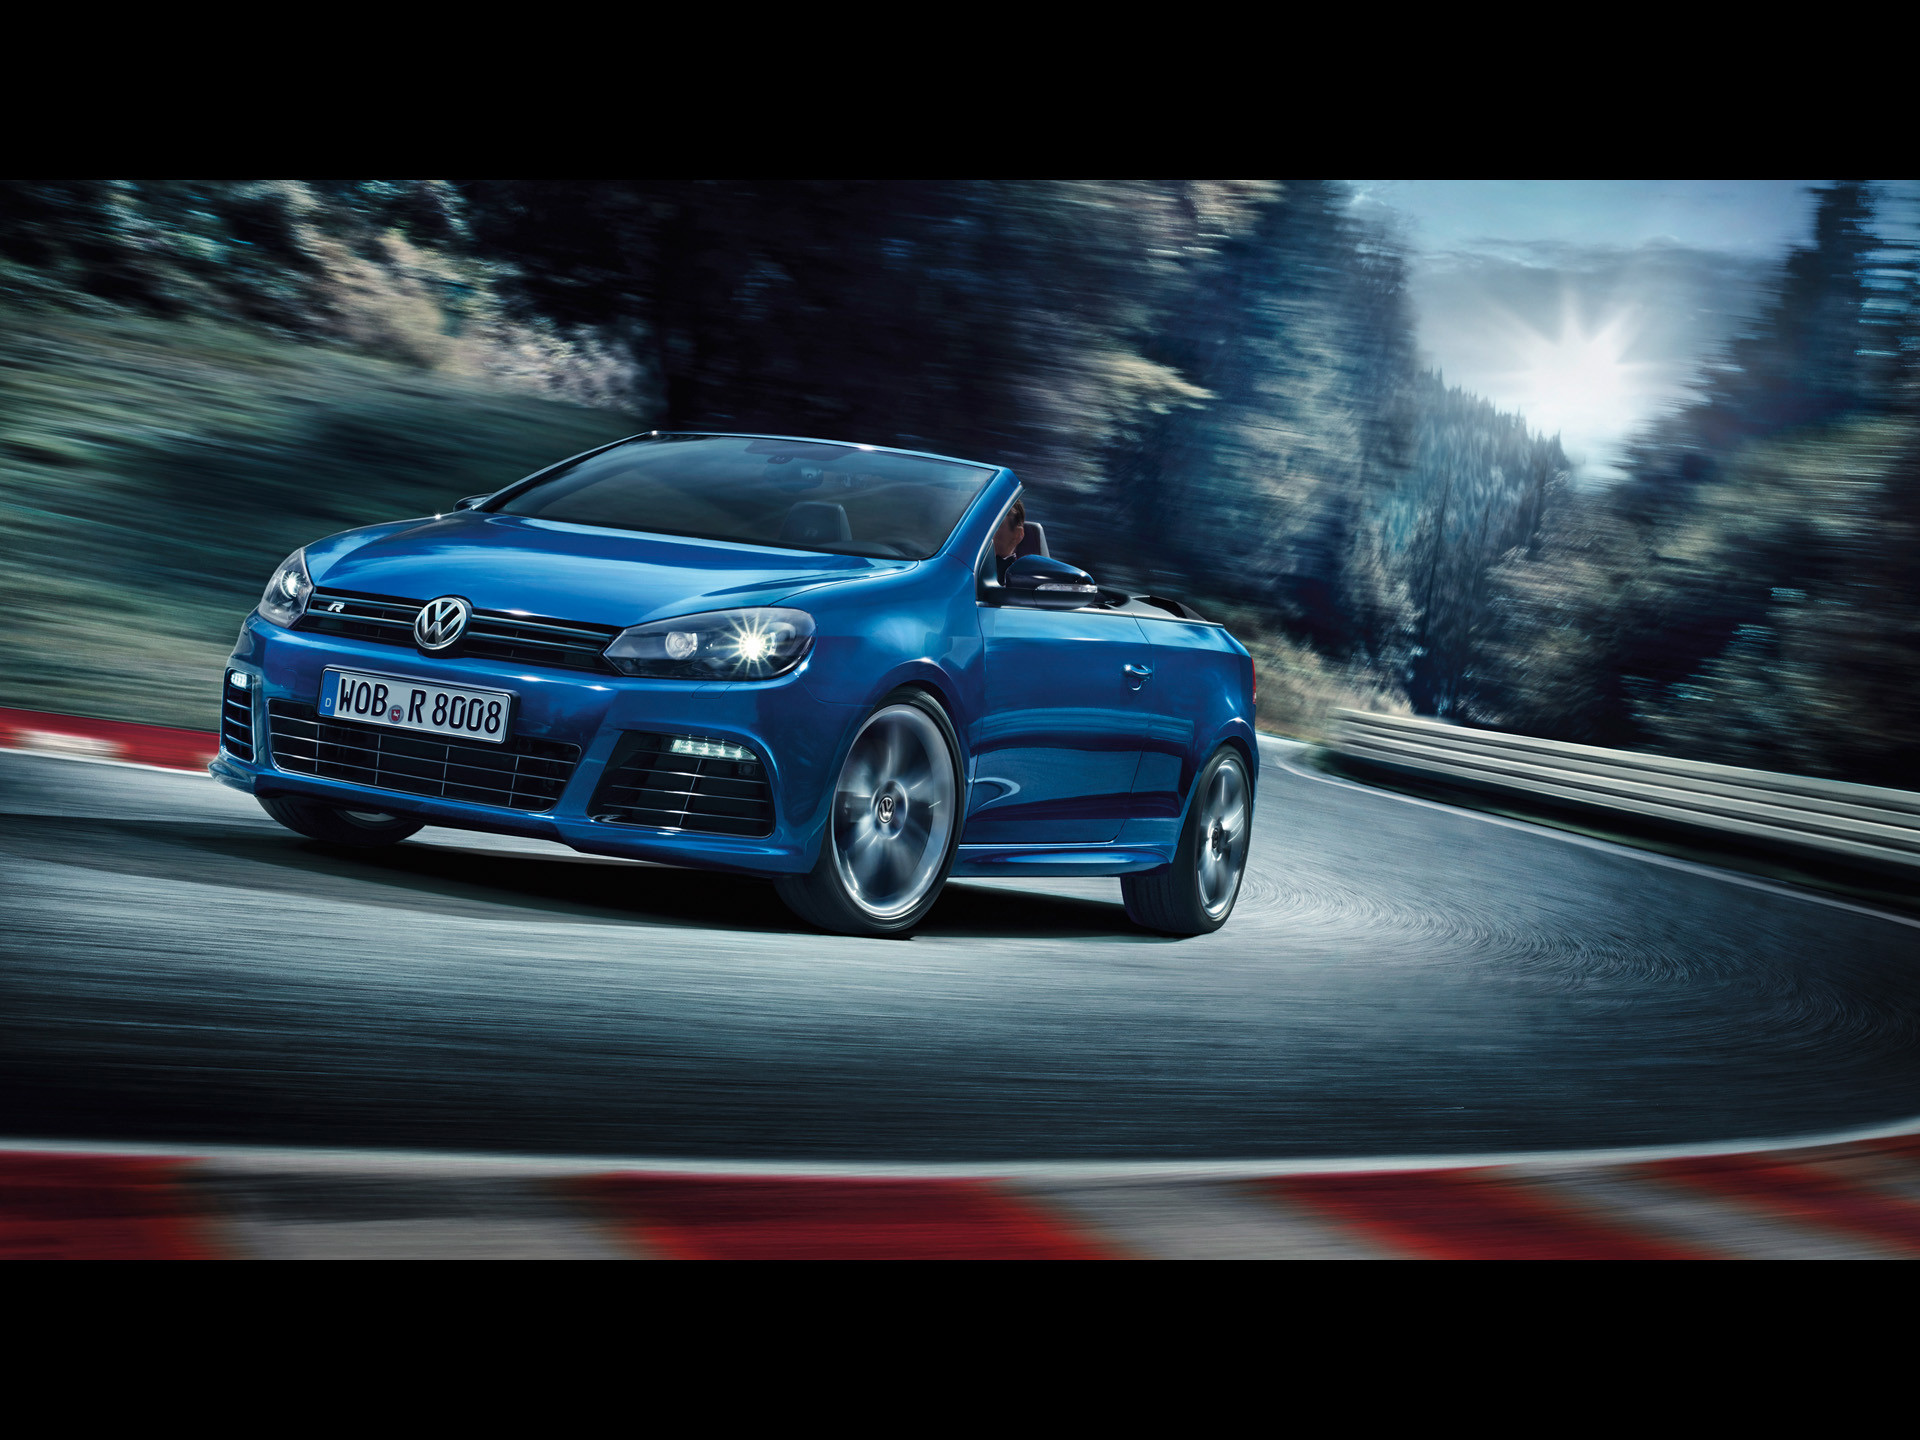 1920x1440 Previous: 2013 Volkswagen Golf R Cabriolet Motion Side Angle ...